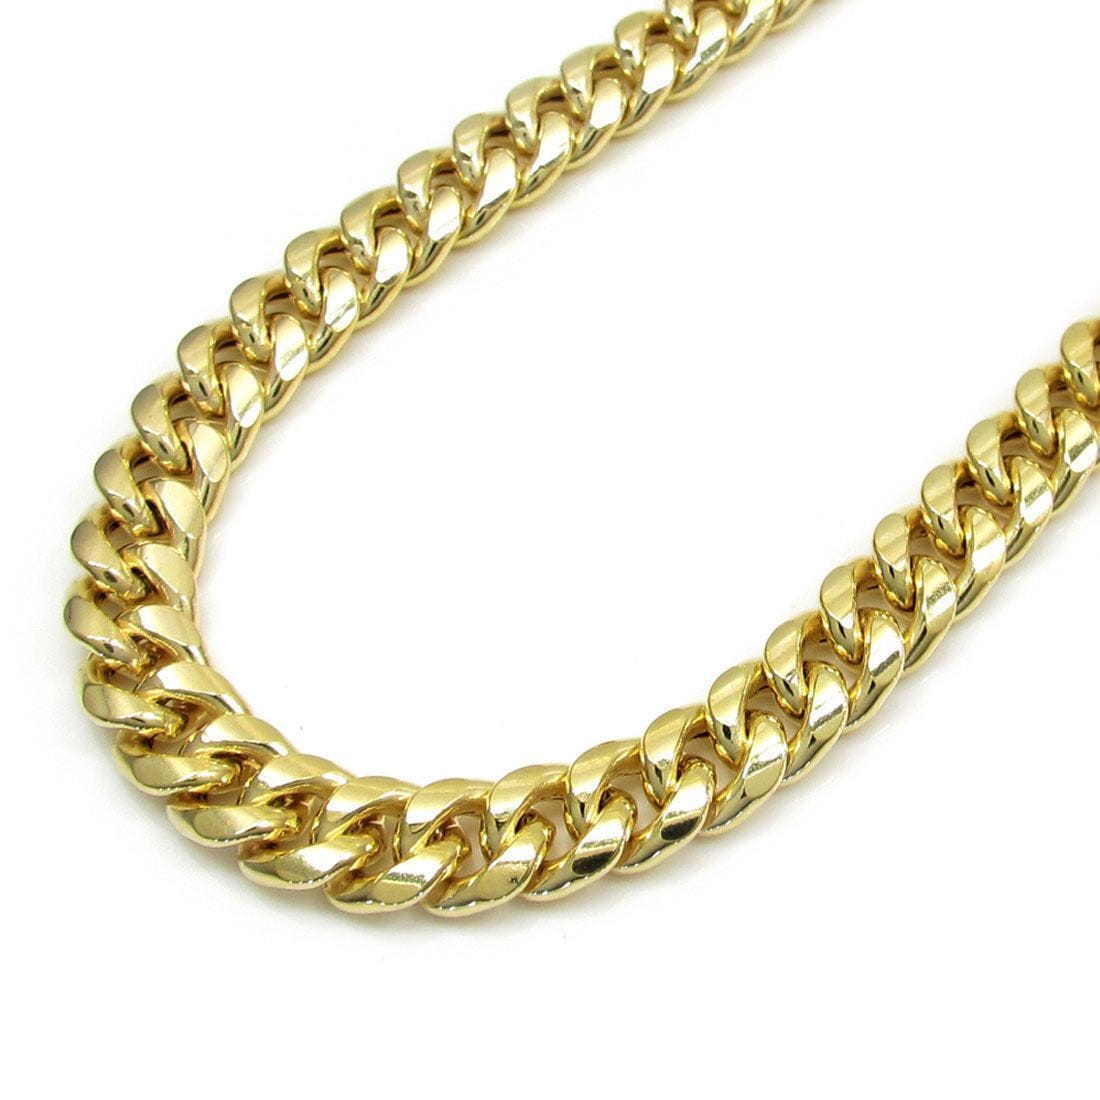 10k Gold Ring or Necklace Price Per Gram $19.20-$22.49 | CoinBin.com